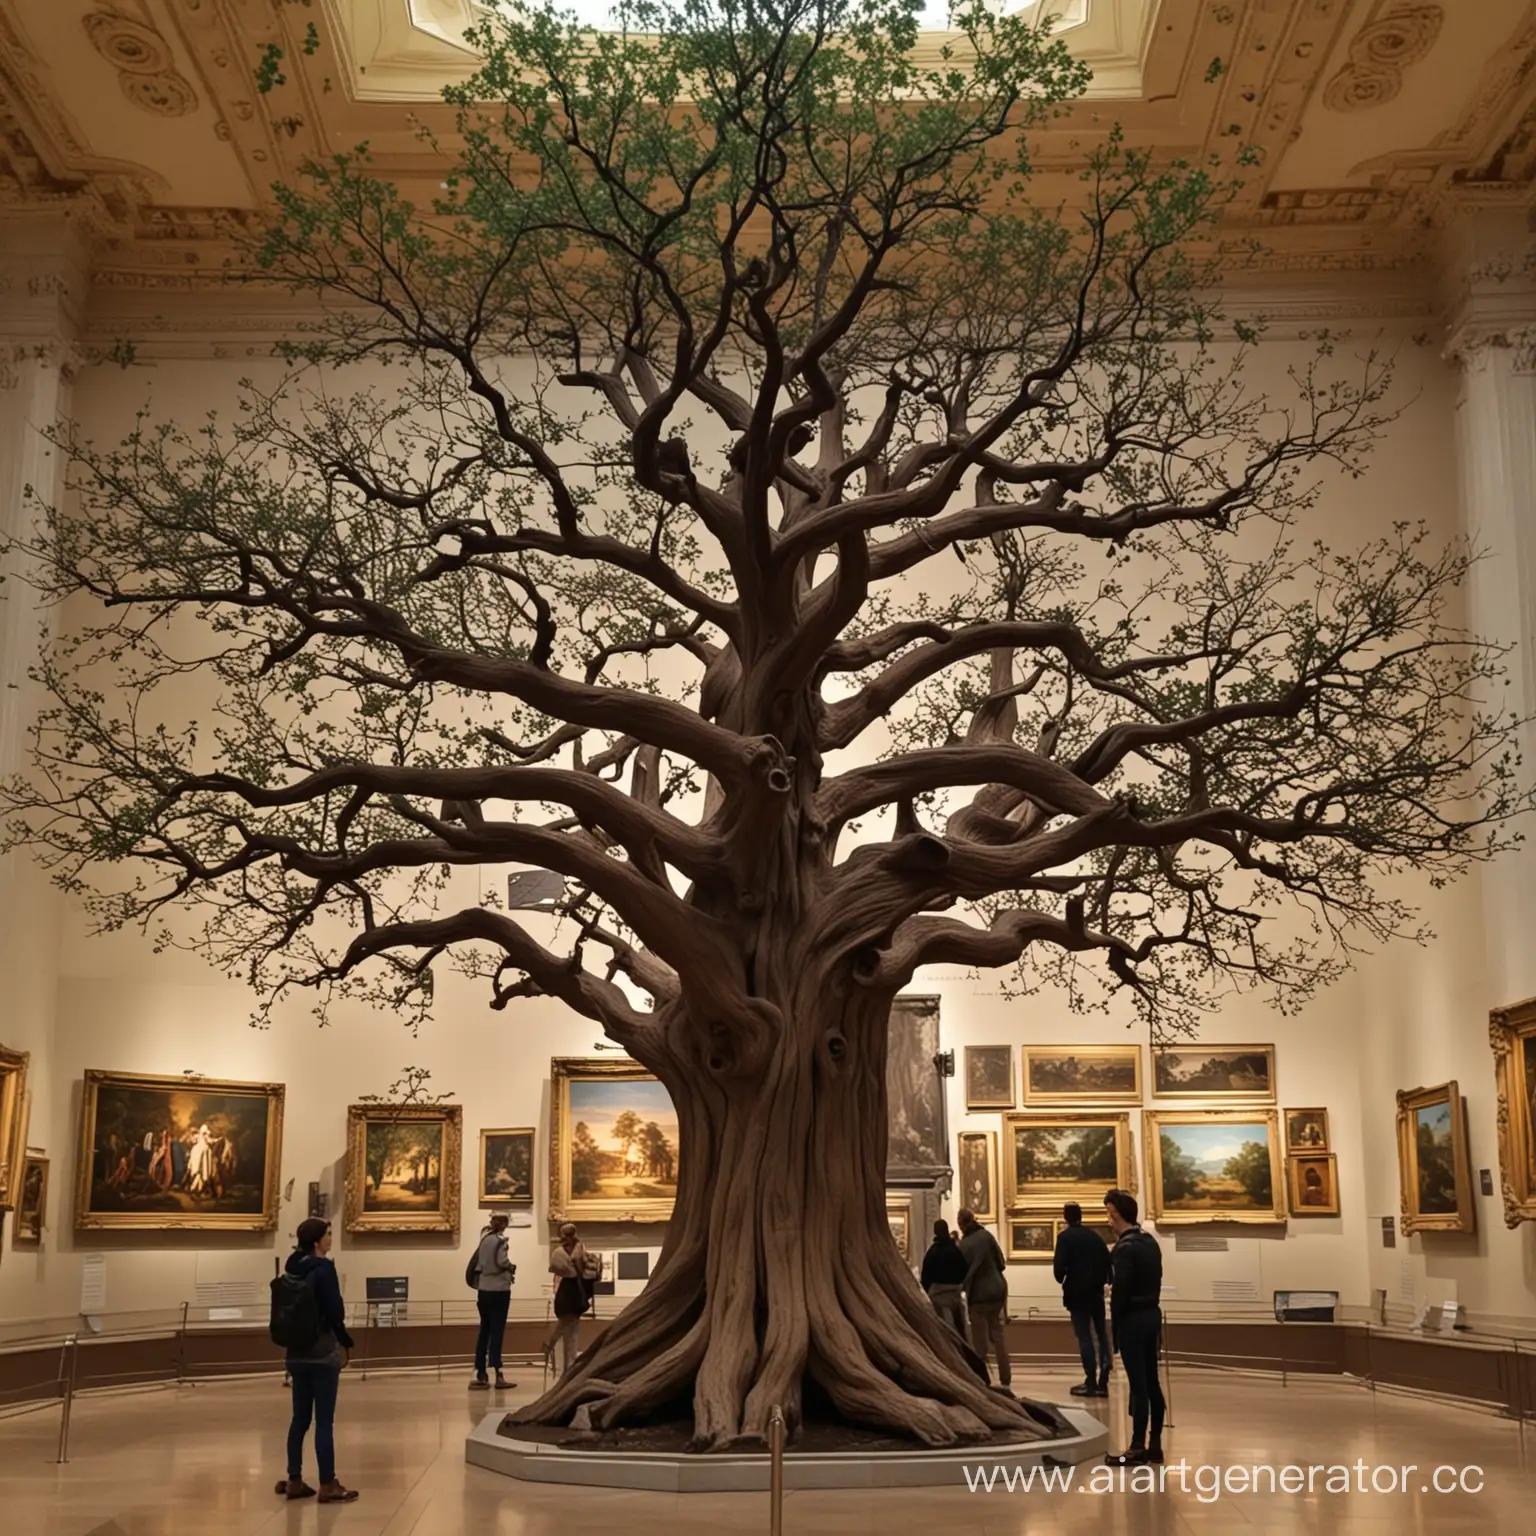 Museum-Tree-Exhibit-with-Observing-Visitors